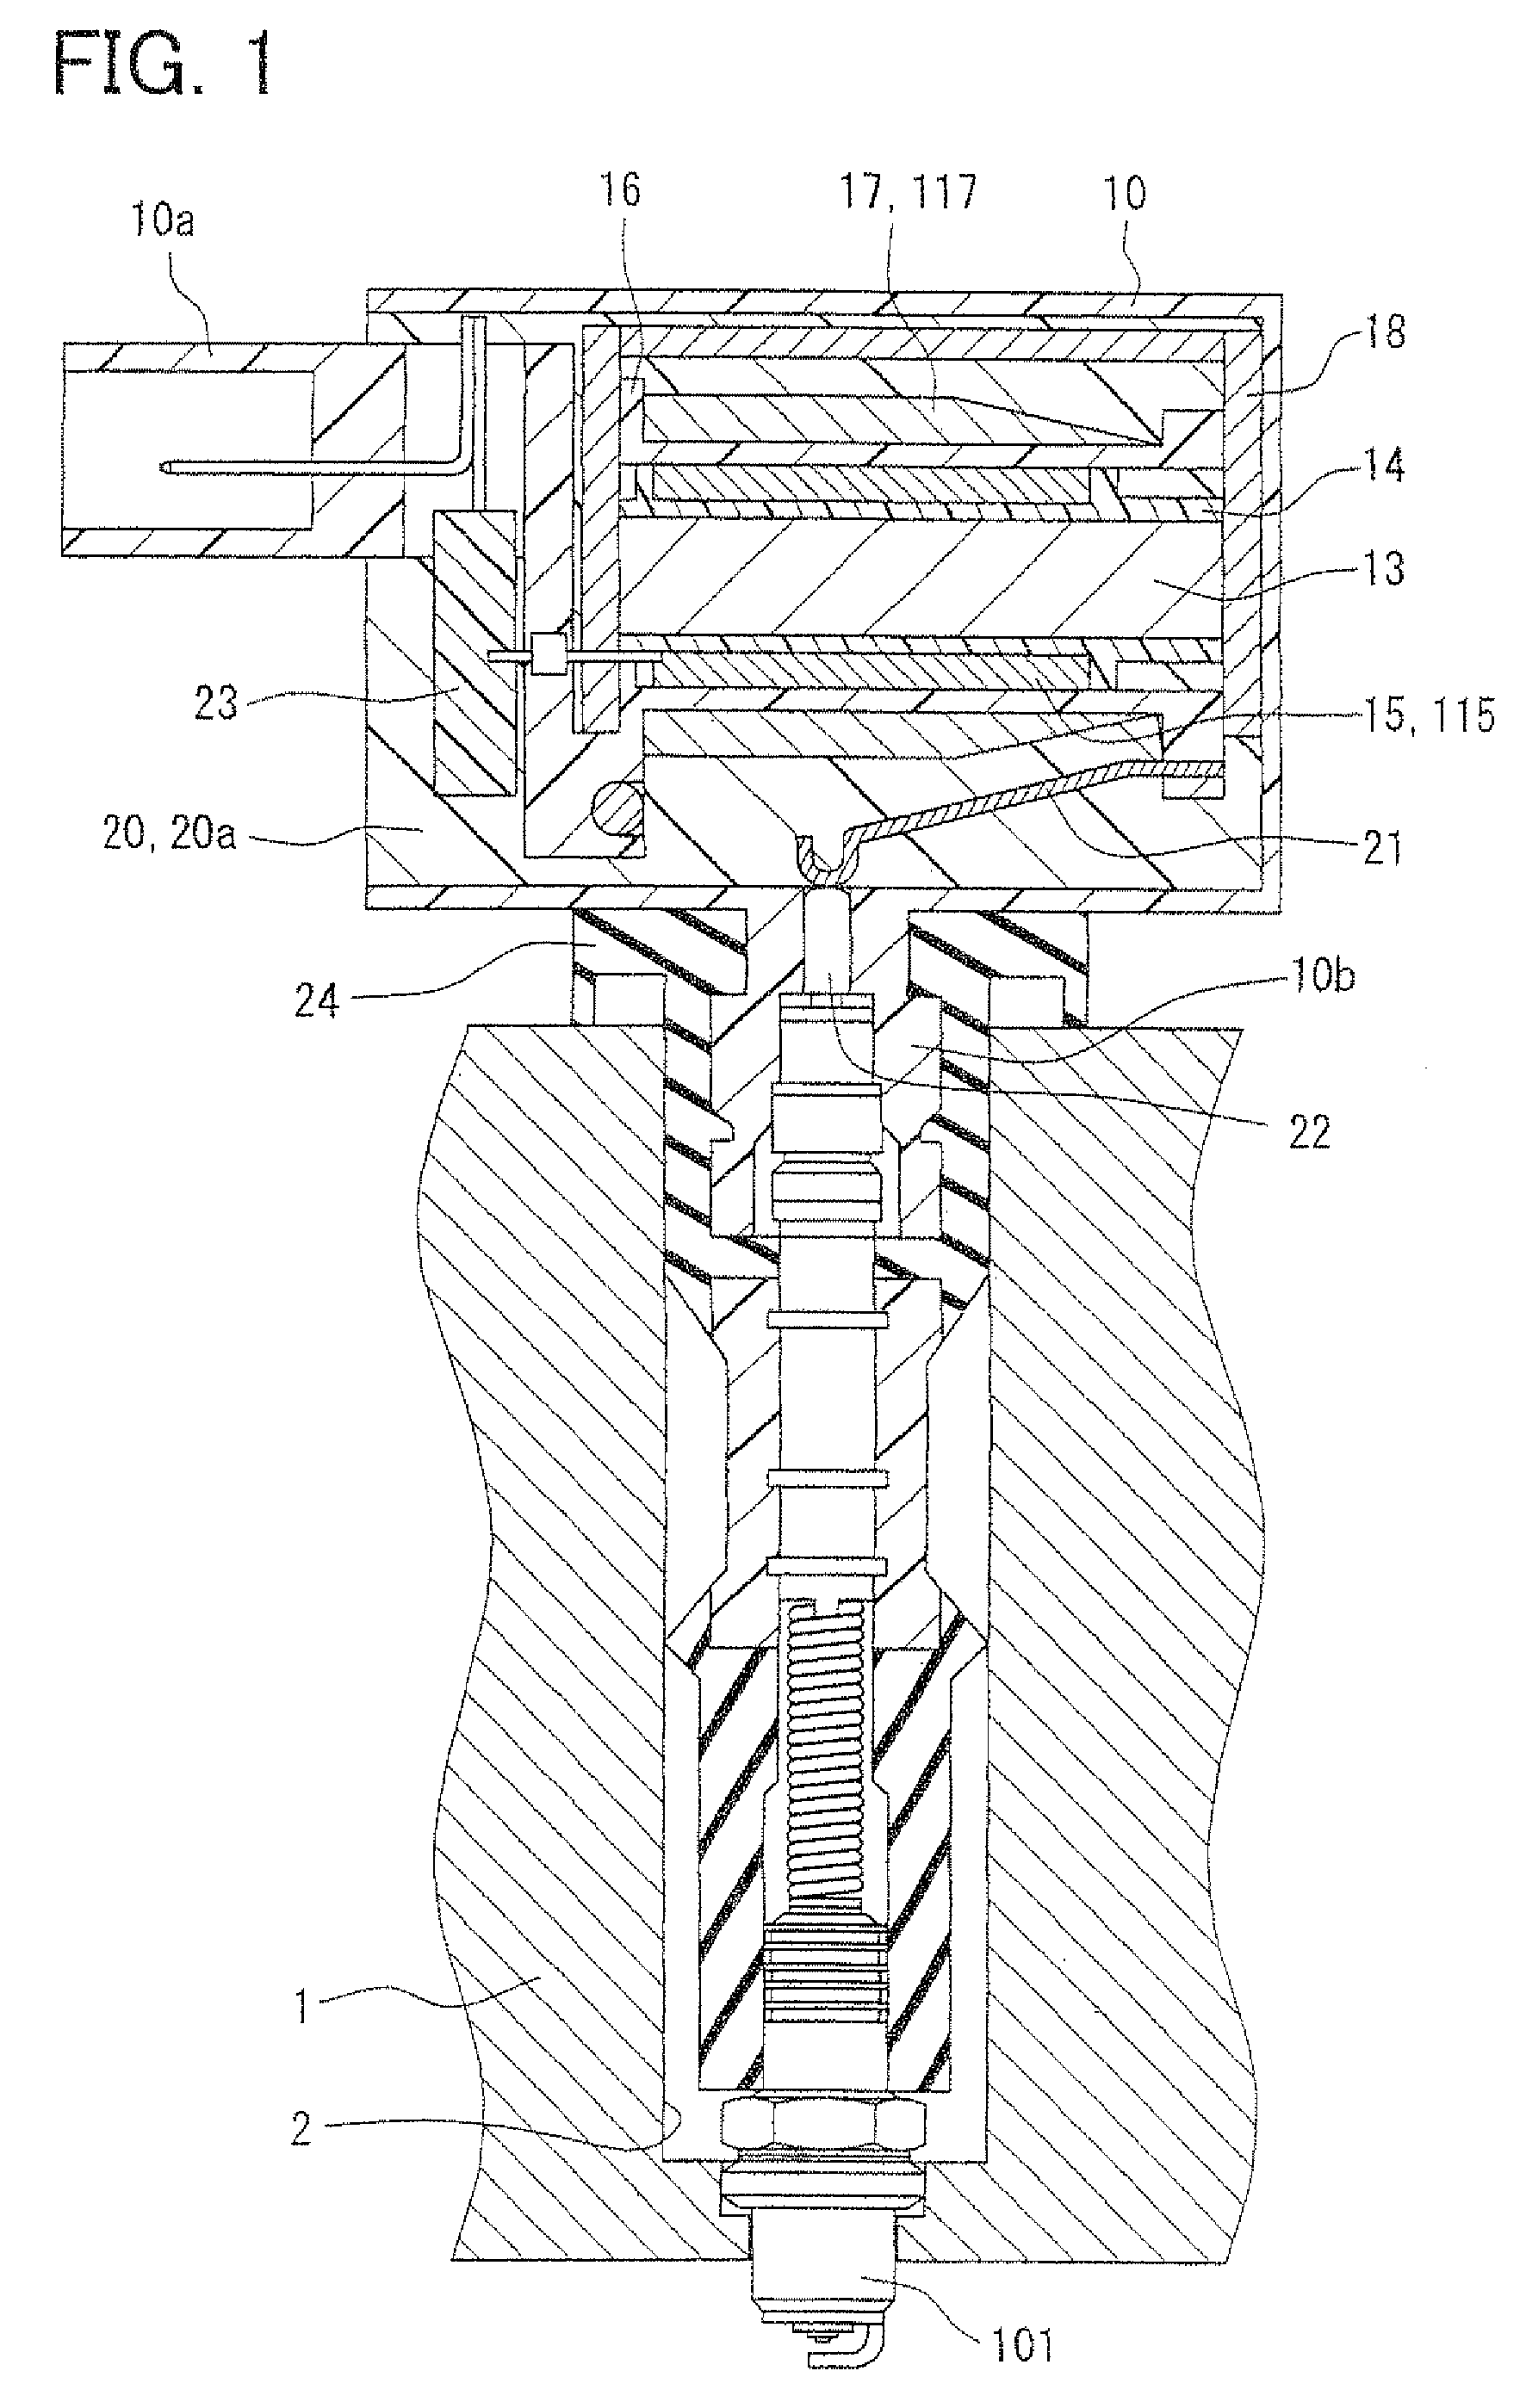 Ignition coil for internal combustion engine and method of making the same